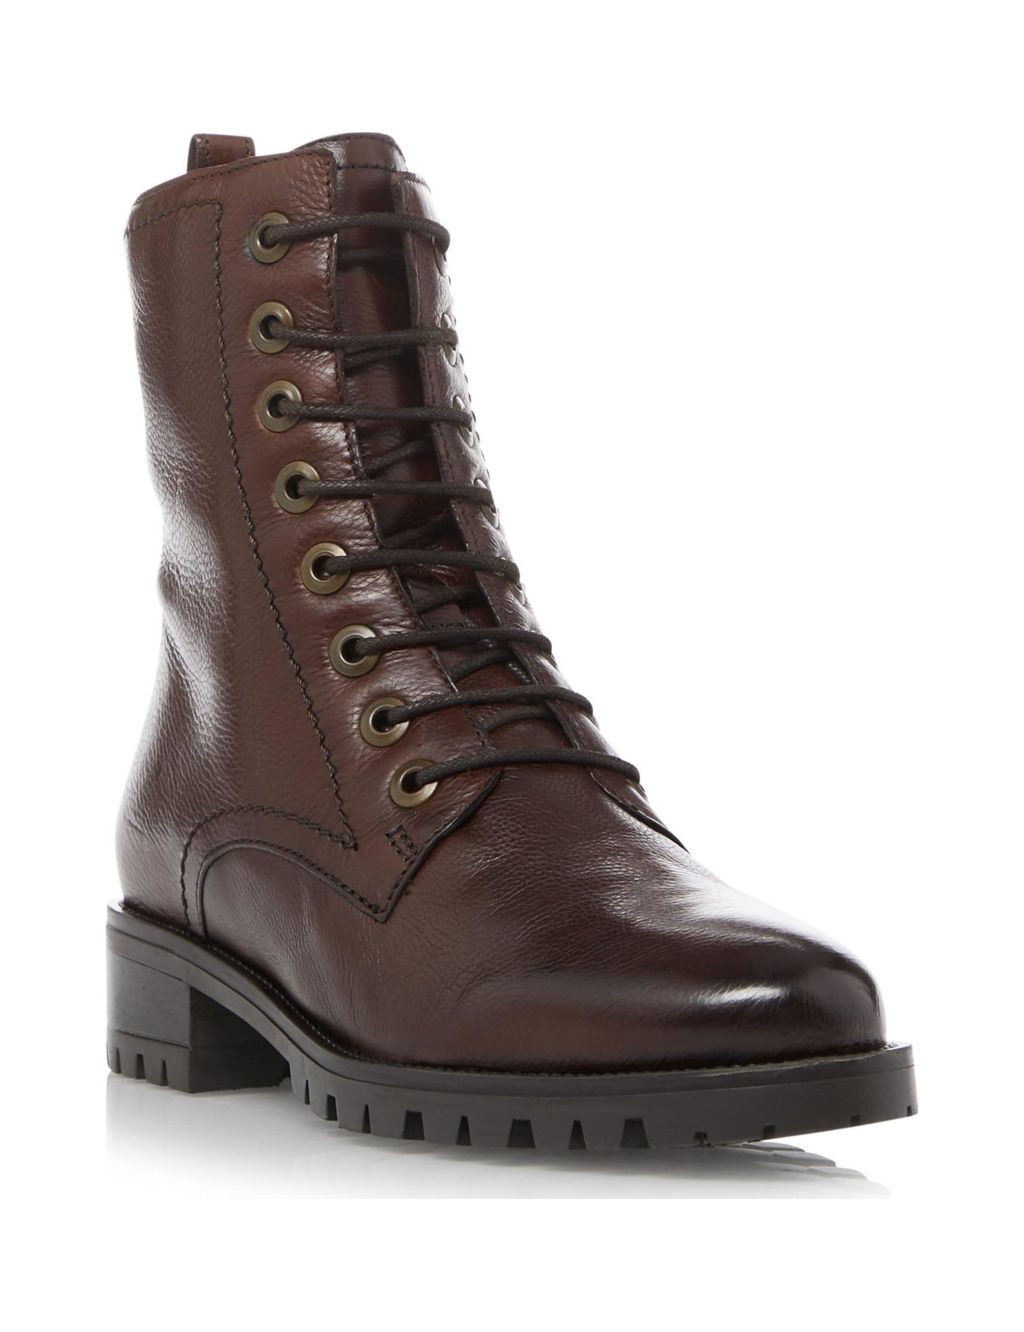 Leather Hiker Lace Up Ankle Boots image 3